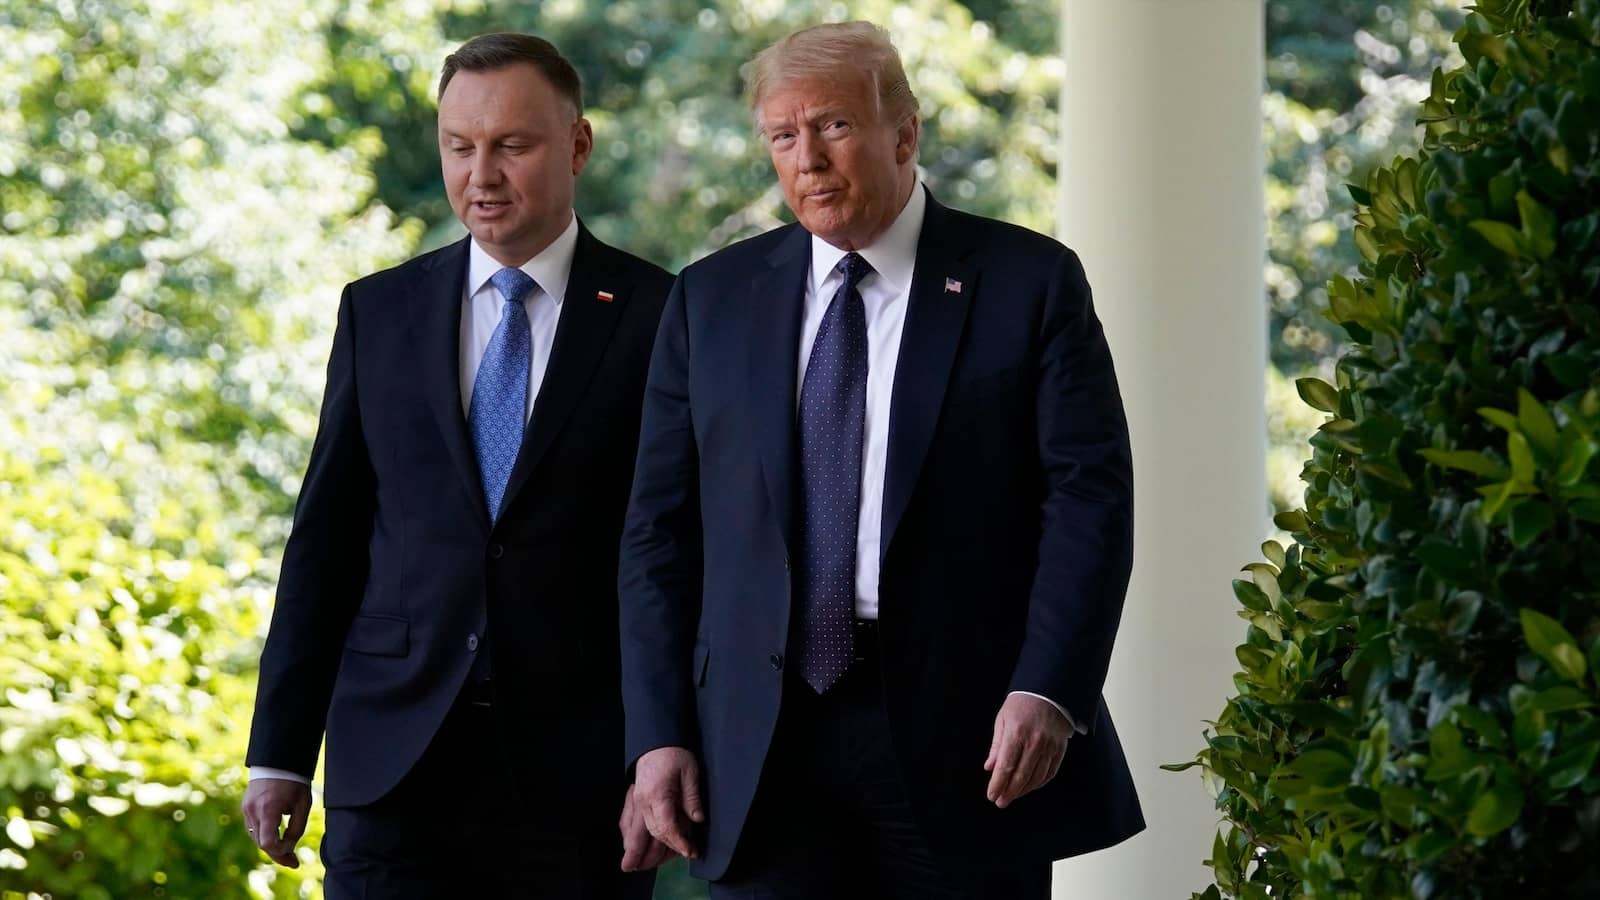 Trump will meet with Polish President Duda as NATO leaders call for additional support for Ukraine